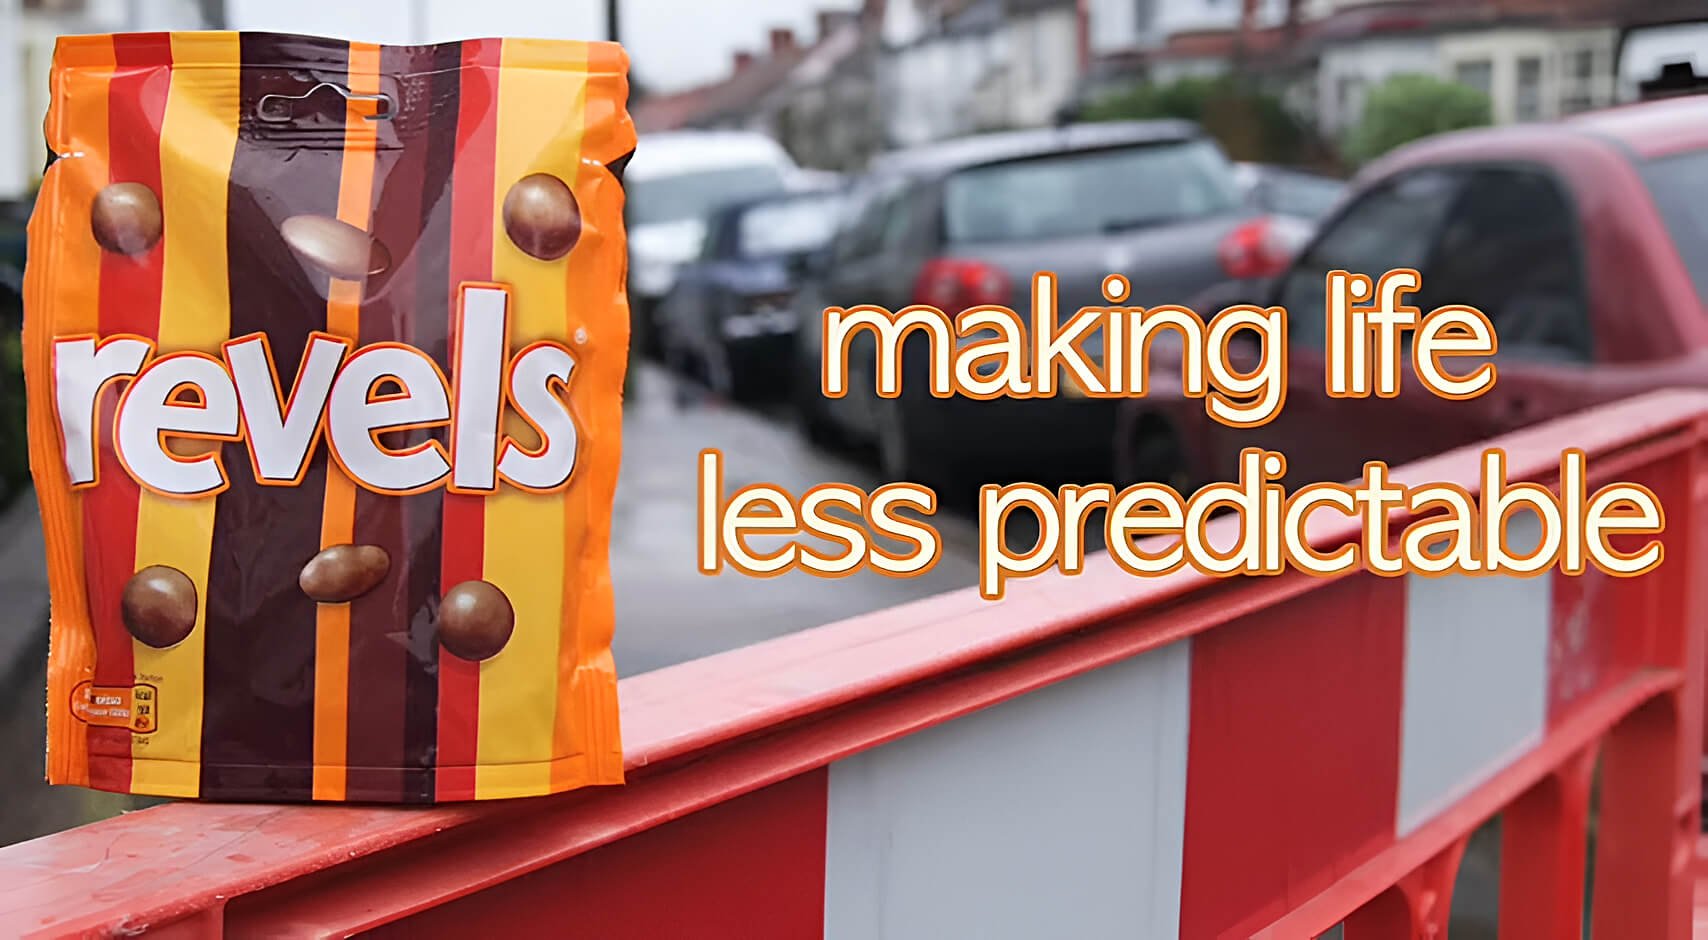 Revels advert from 2010 with slogan Making life less predictable